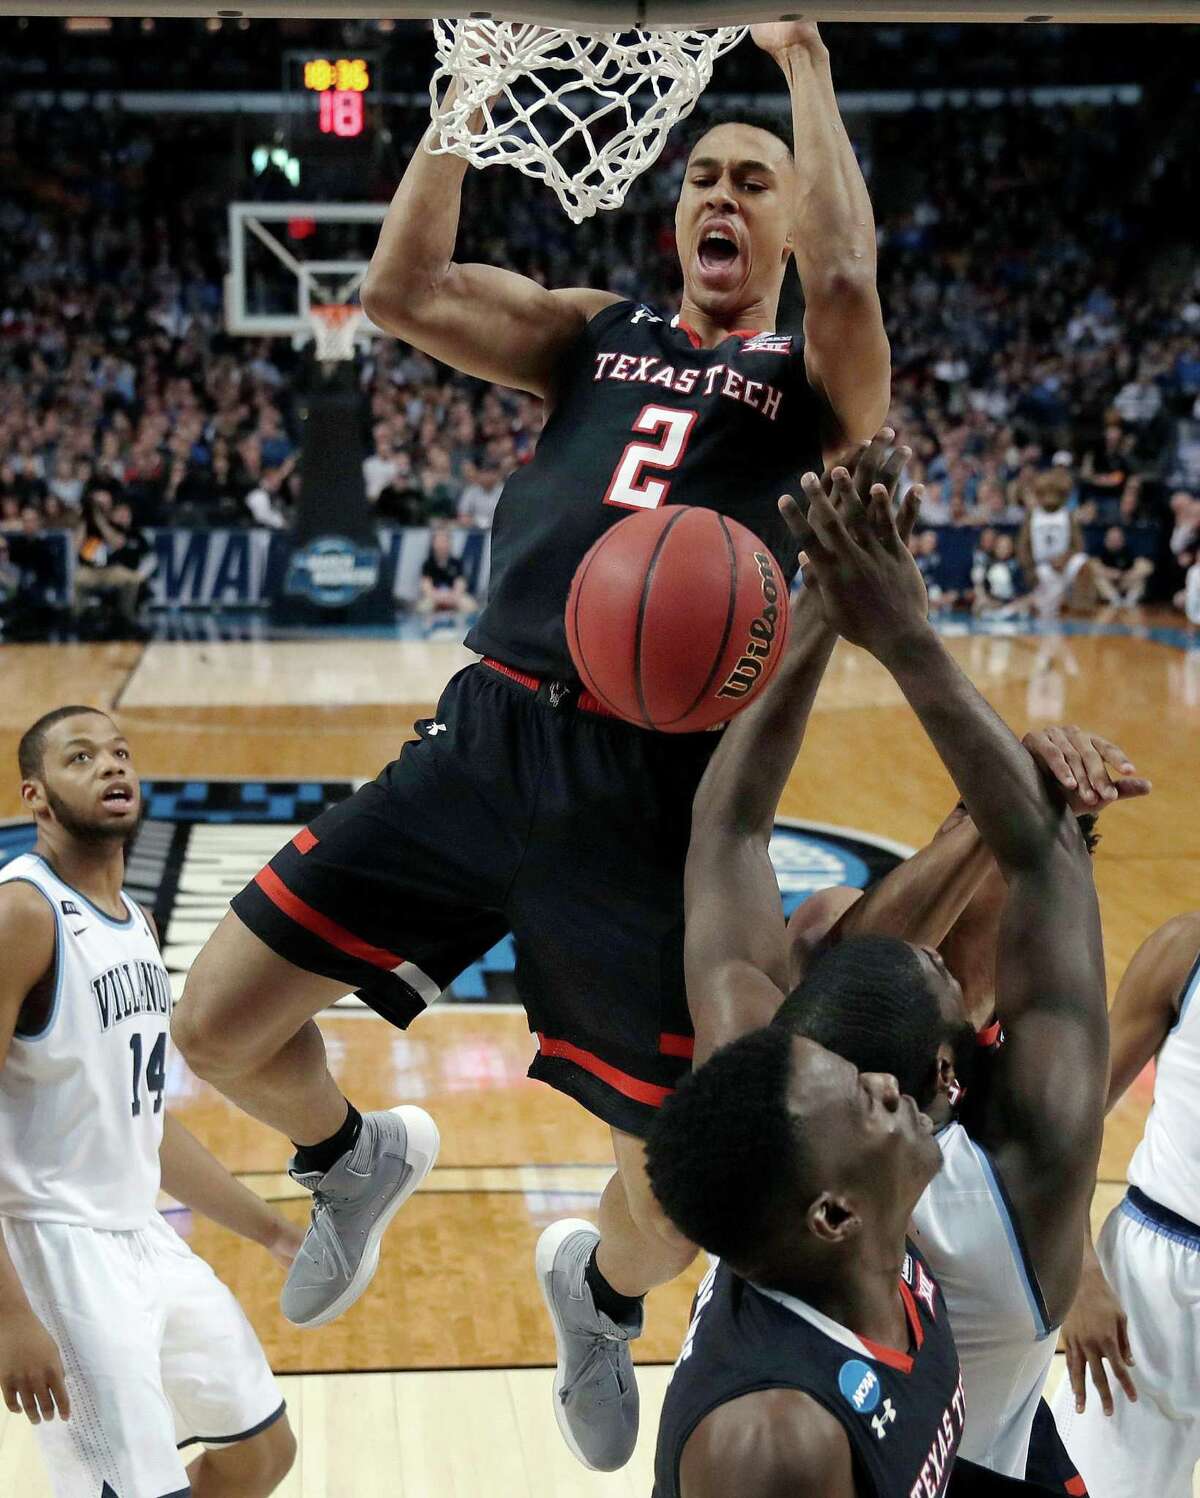 Zhaire Smith Age: 18 Position: SG Size: 6-5, 195 2017-18: Texas TechFun fact: Smith is represented by Roc Nation Sports’ Roger Montgomery, who also represents the Spurs’ Rudy Gay.